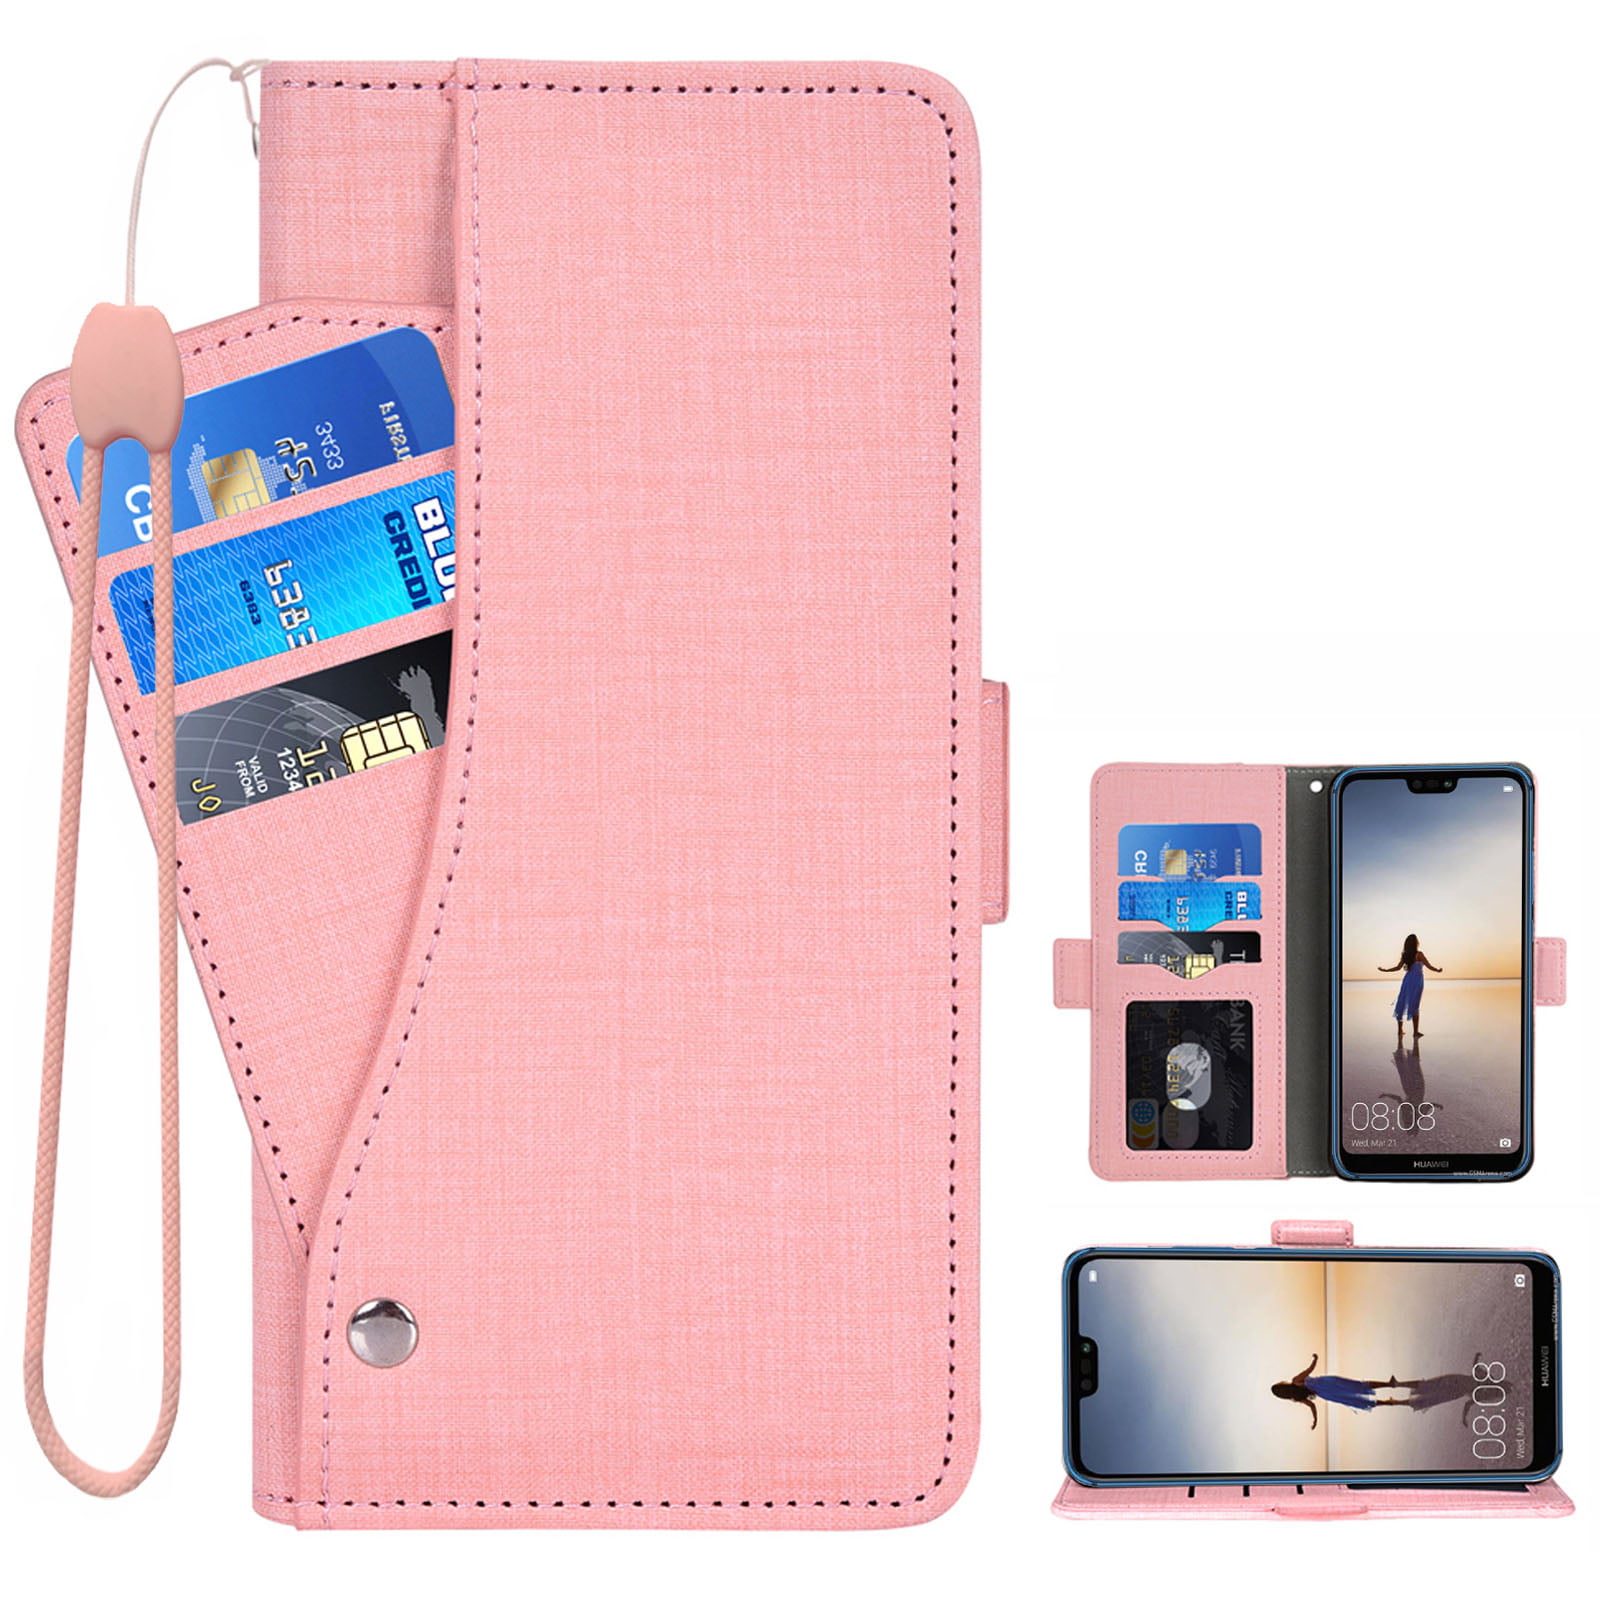 with Universal Underwater Waterproof Case Leather Flip Case for Huawei P20 Business Gifts Wallet Cover Compatible with Huawei P20